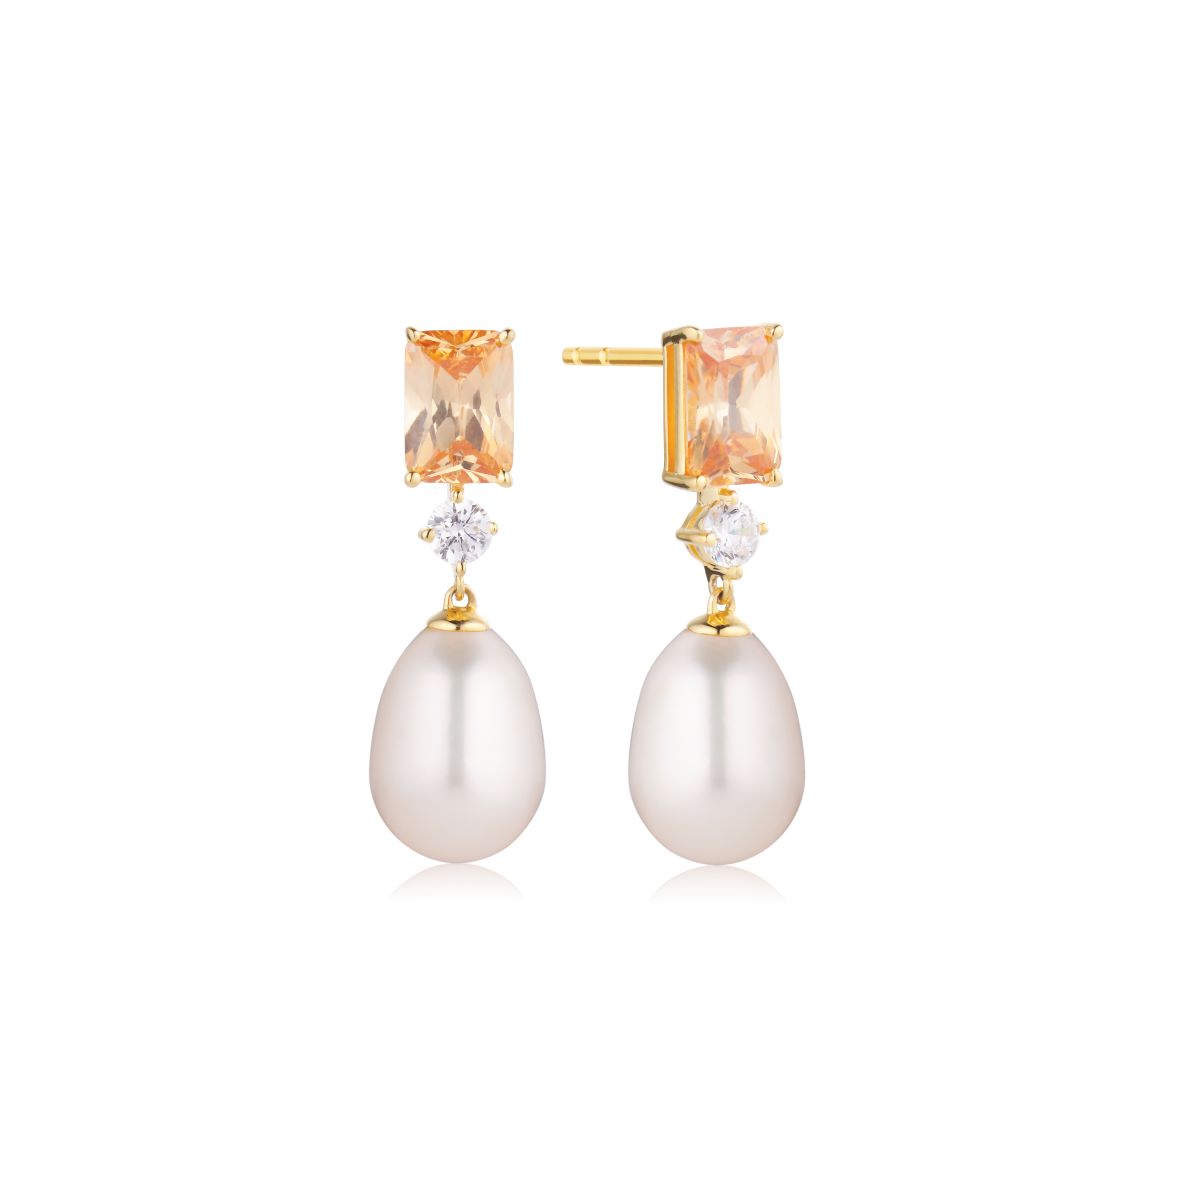 Sif Jakobs Galatina Earrings - Gold with Pearl and Zirconia